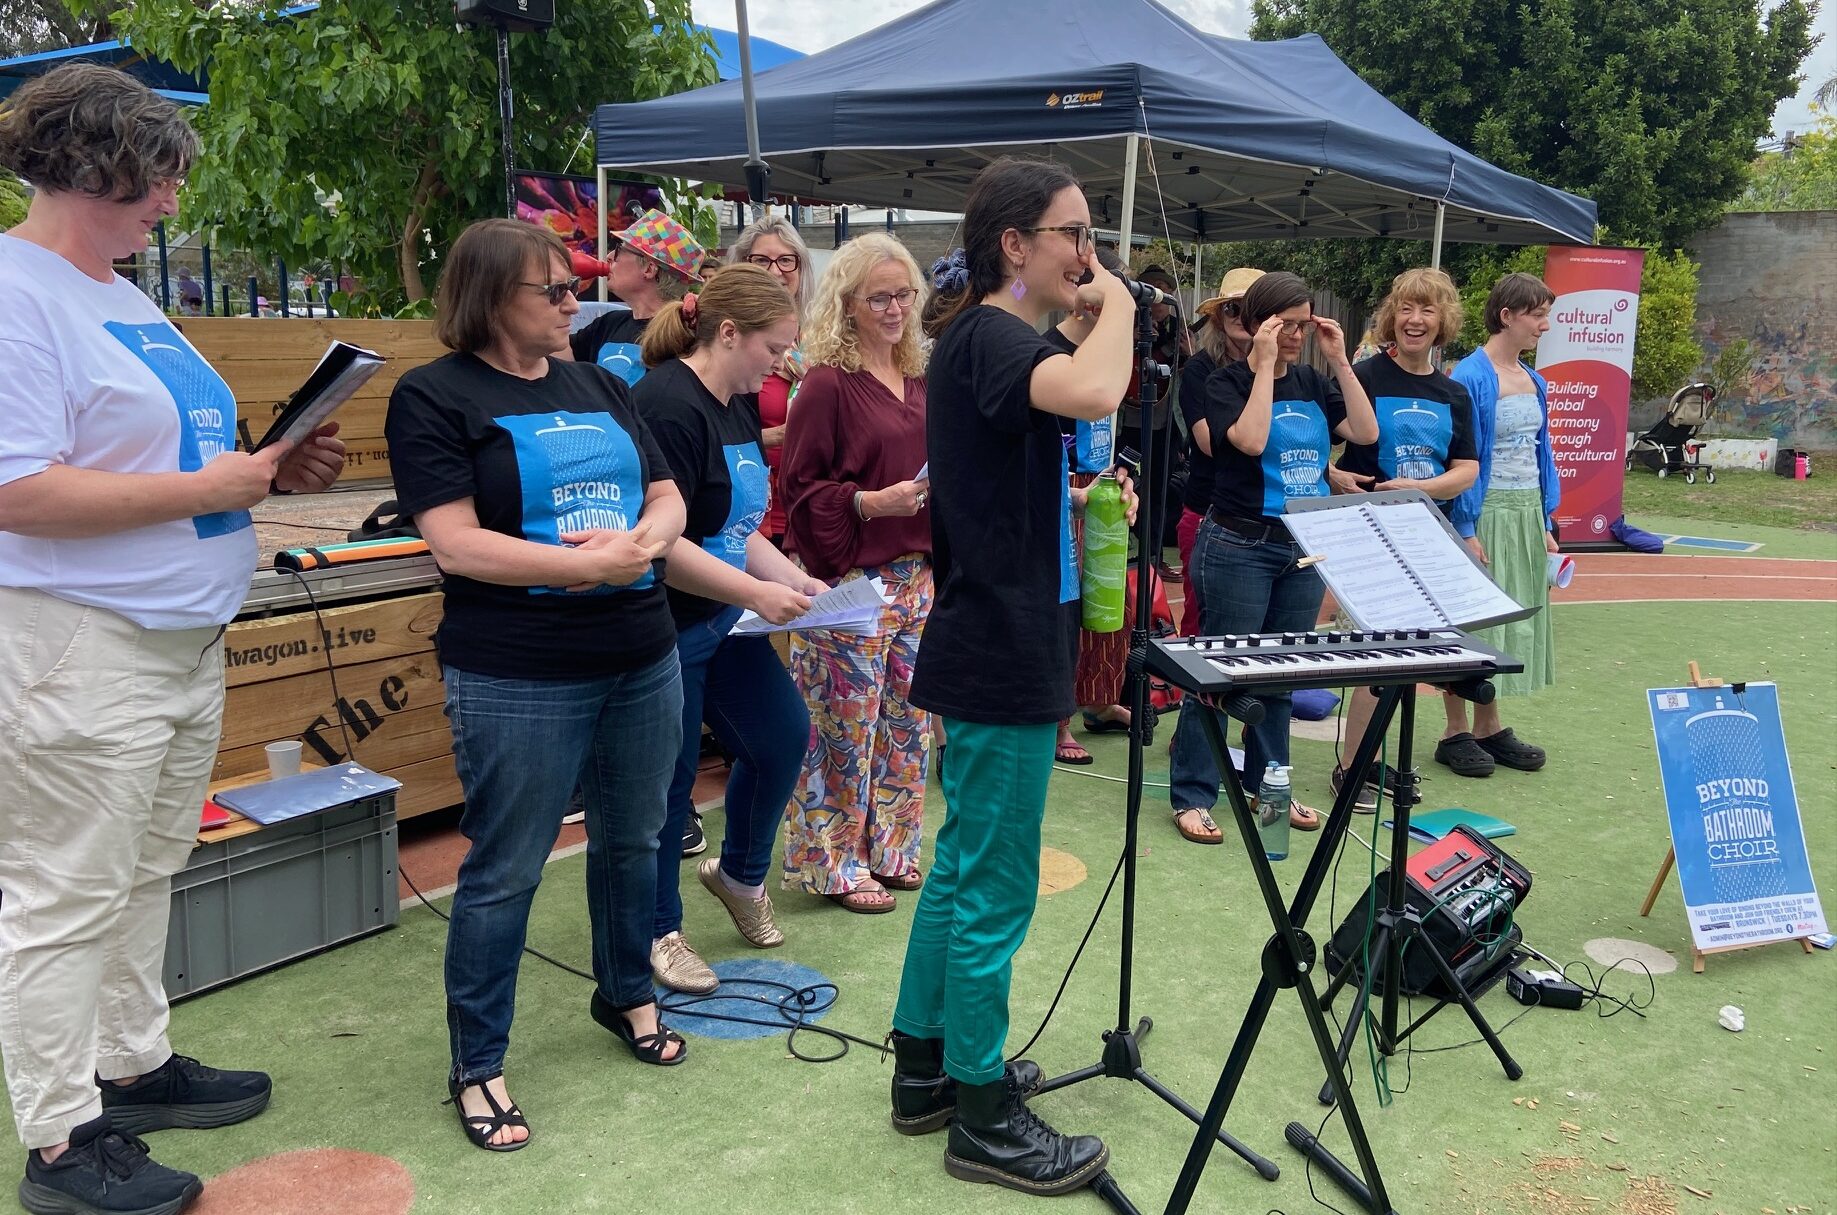 BTB performing at the Fitzroy Primary School fete.